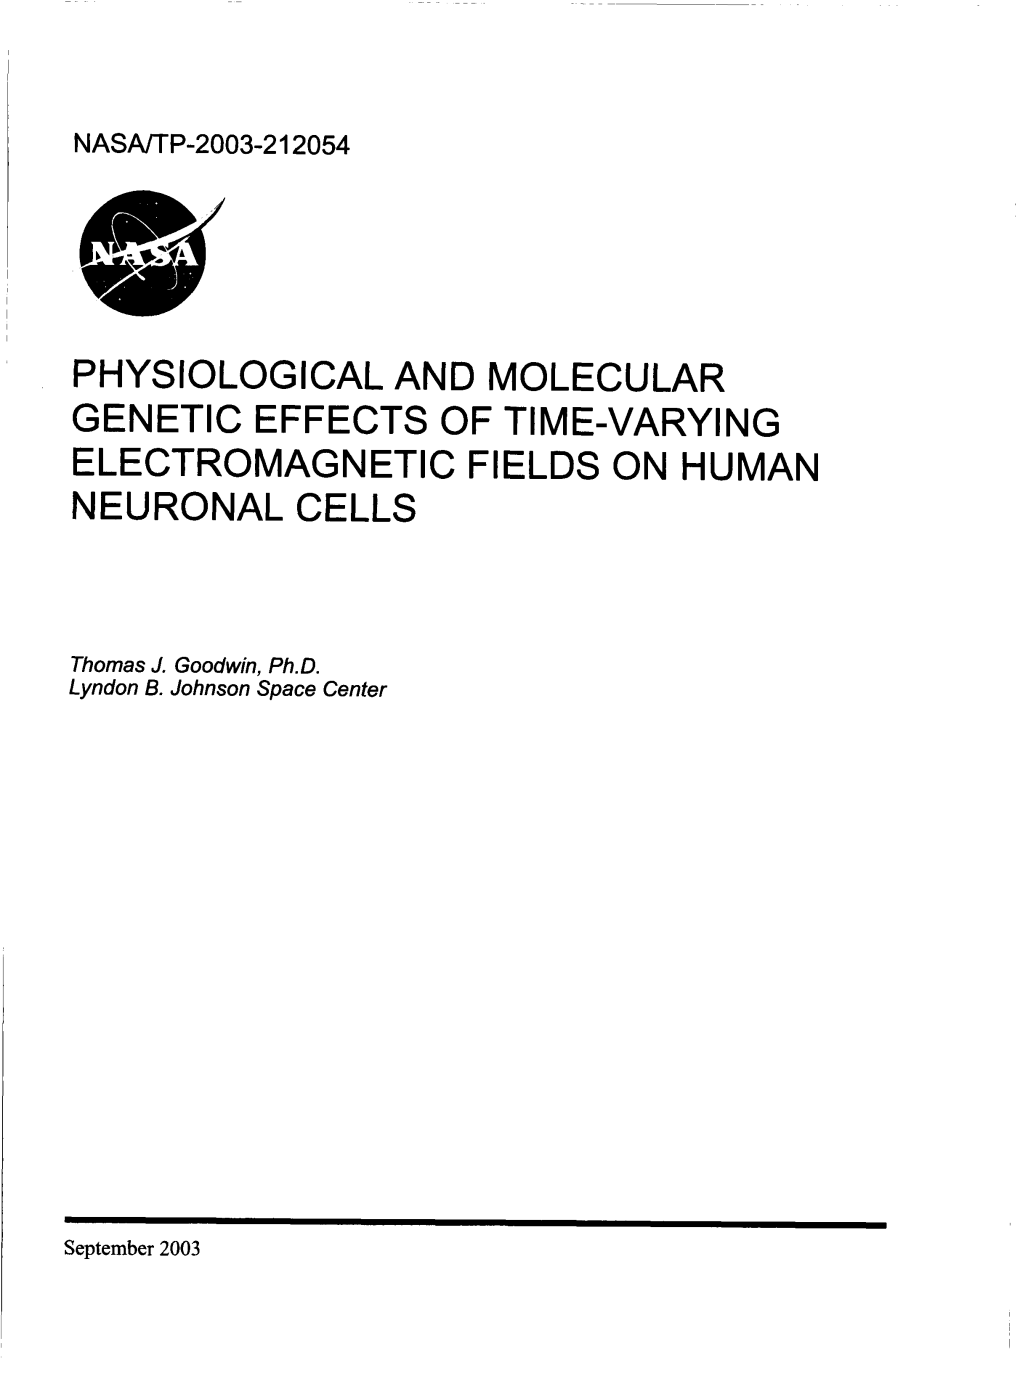 Physiological and Molecular Electromagnetic Fields on Human